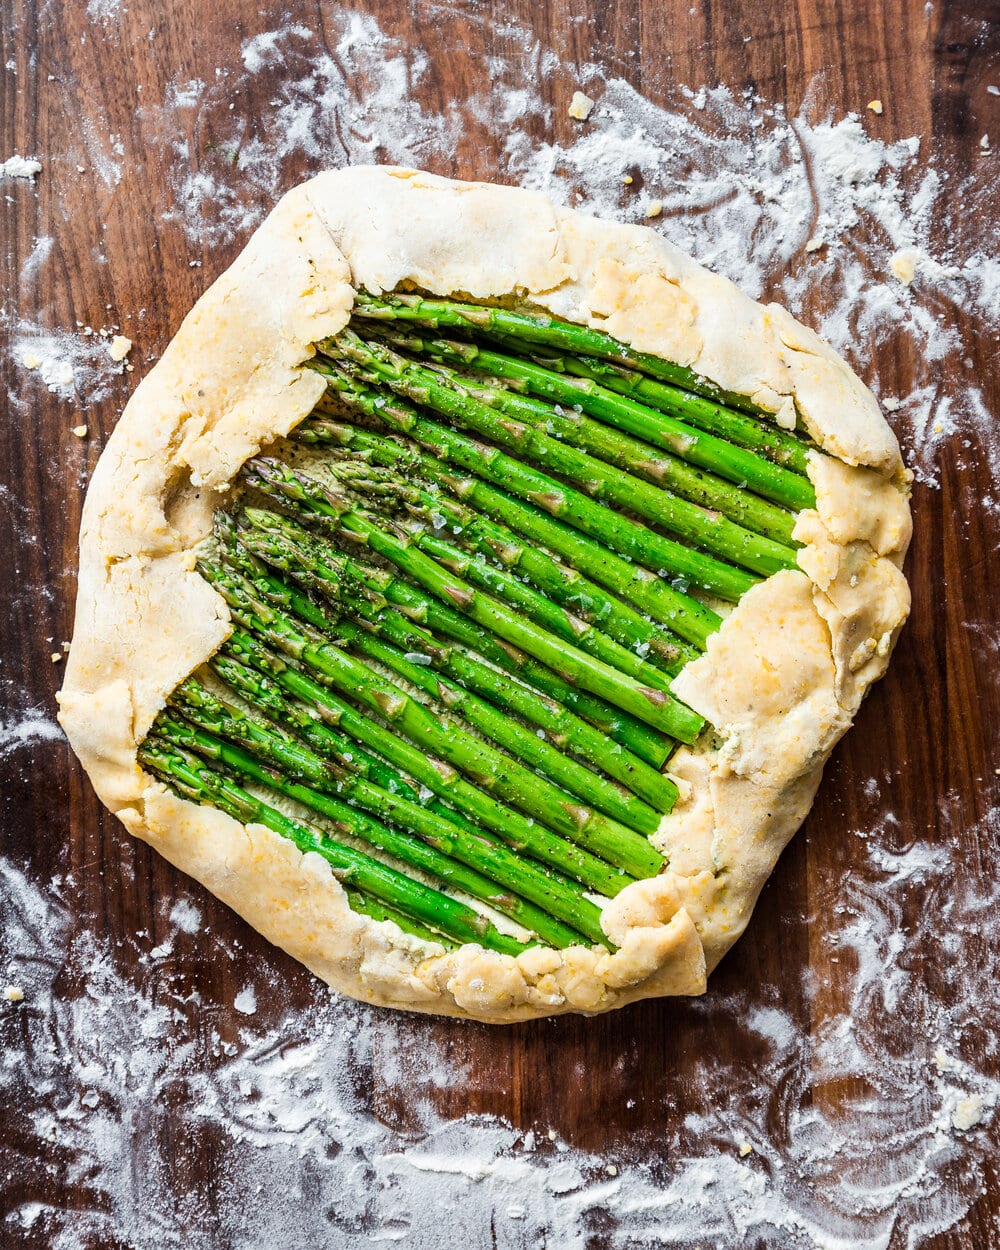 Dough folded over all sides of the asparagus.